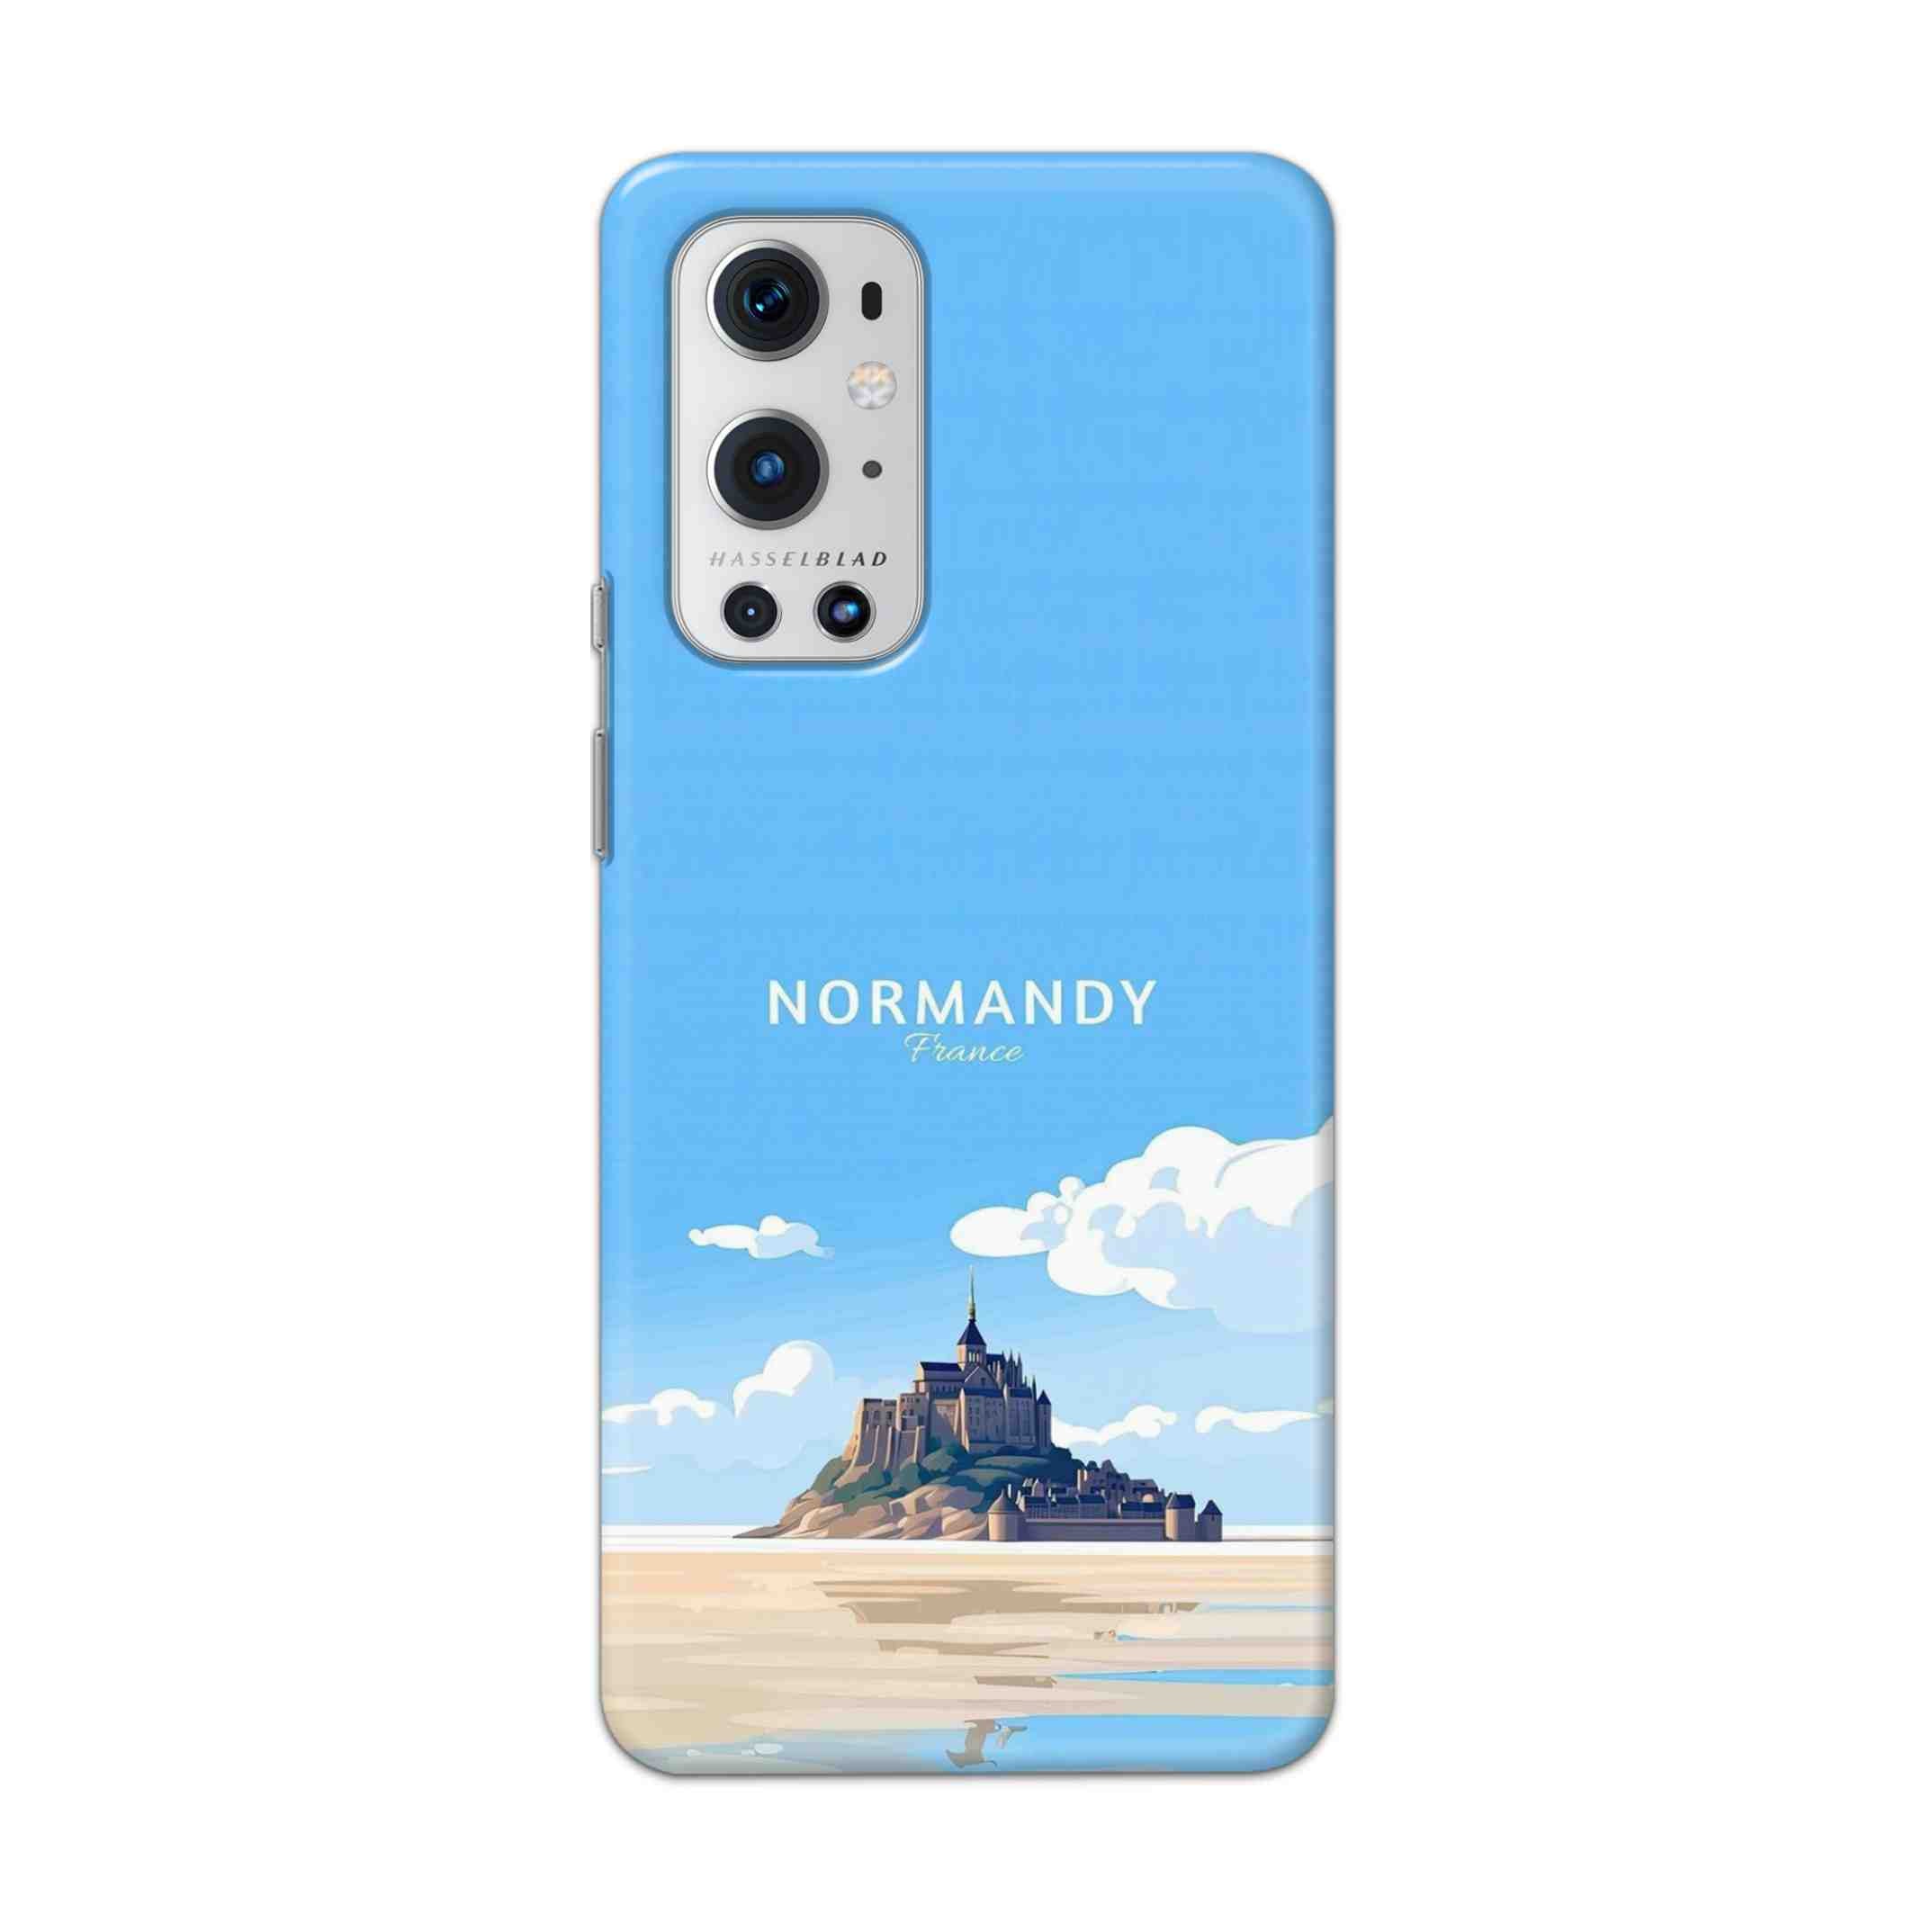 Buy Normandy Hard Back Mobile Phone Case Cover For OnePlus 9 Pro Online